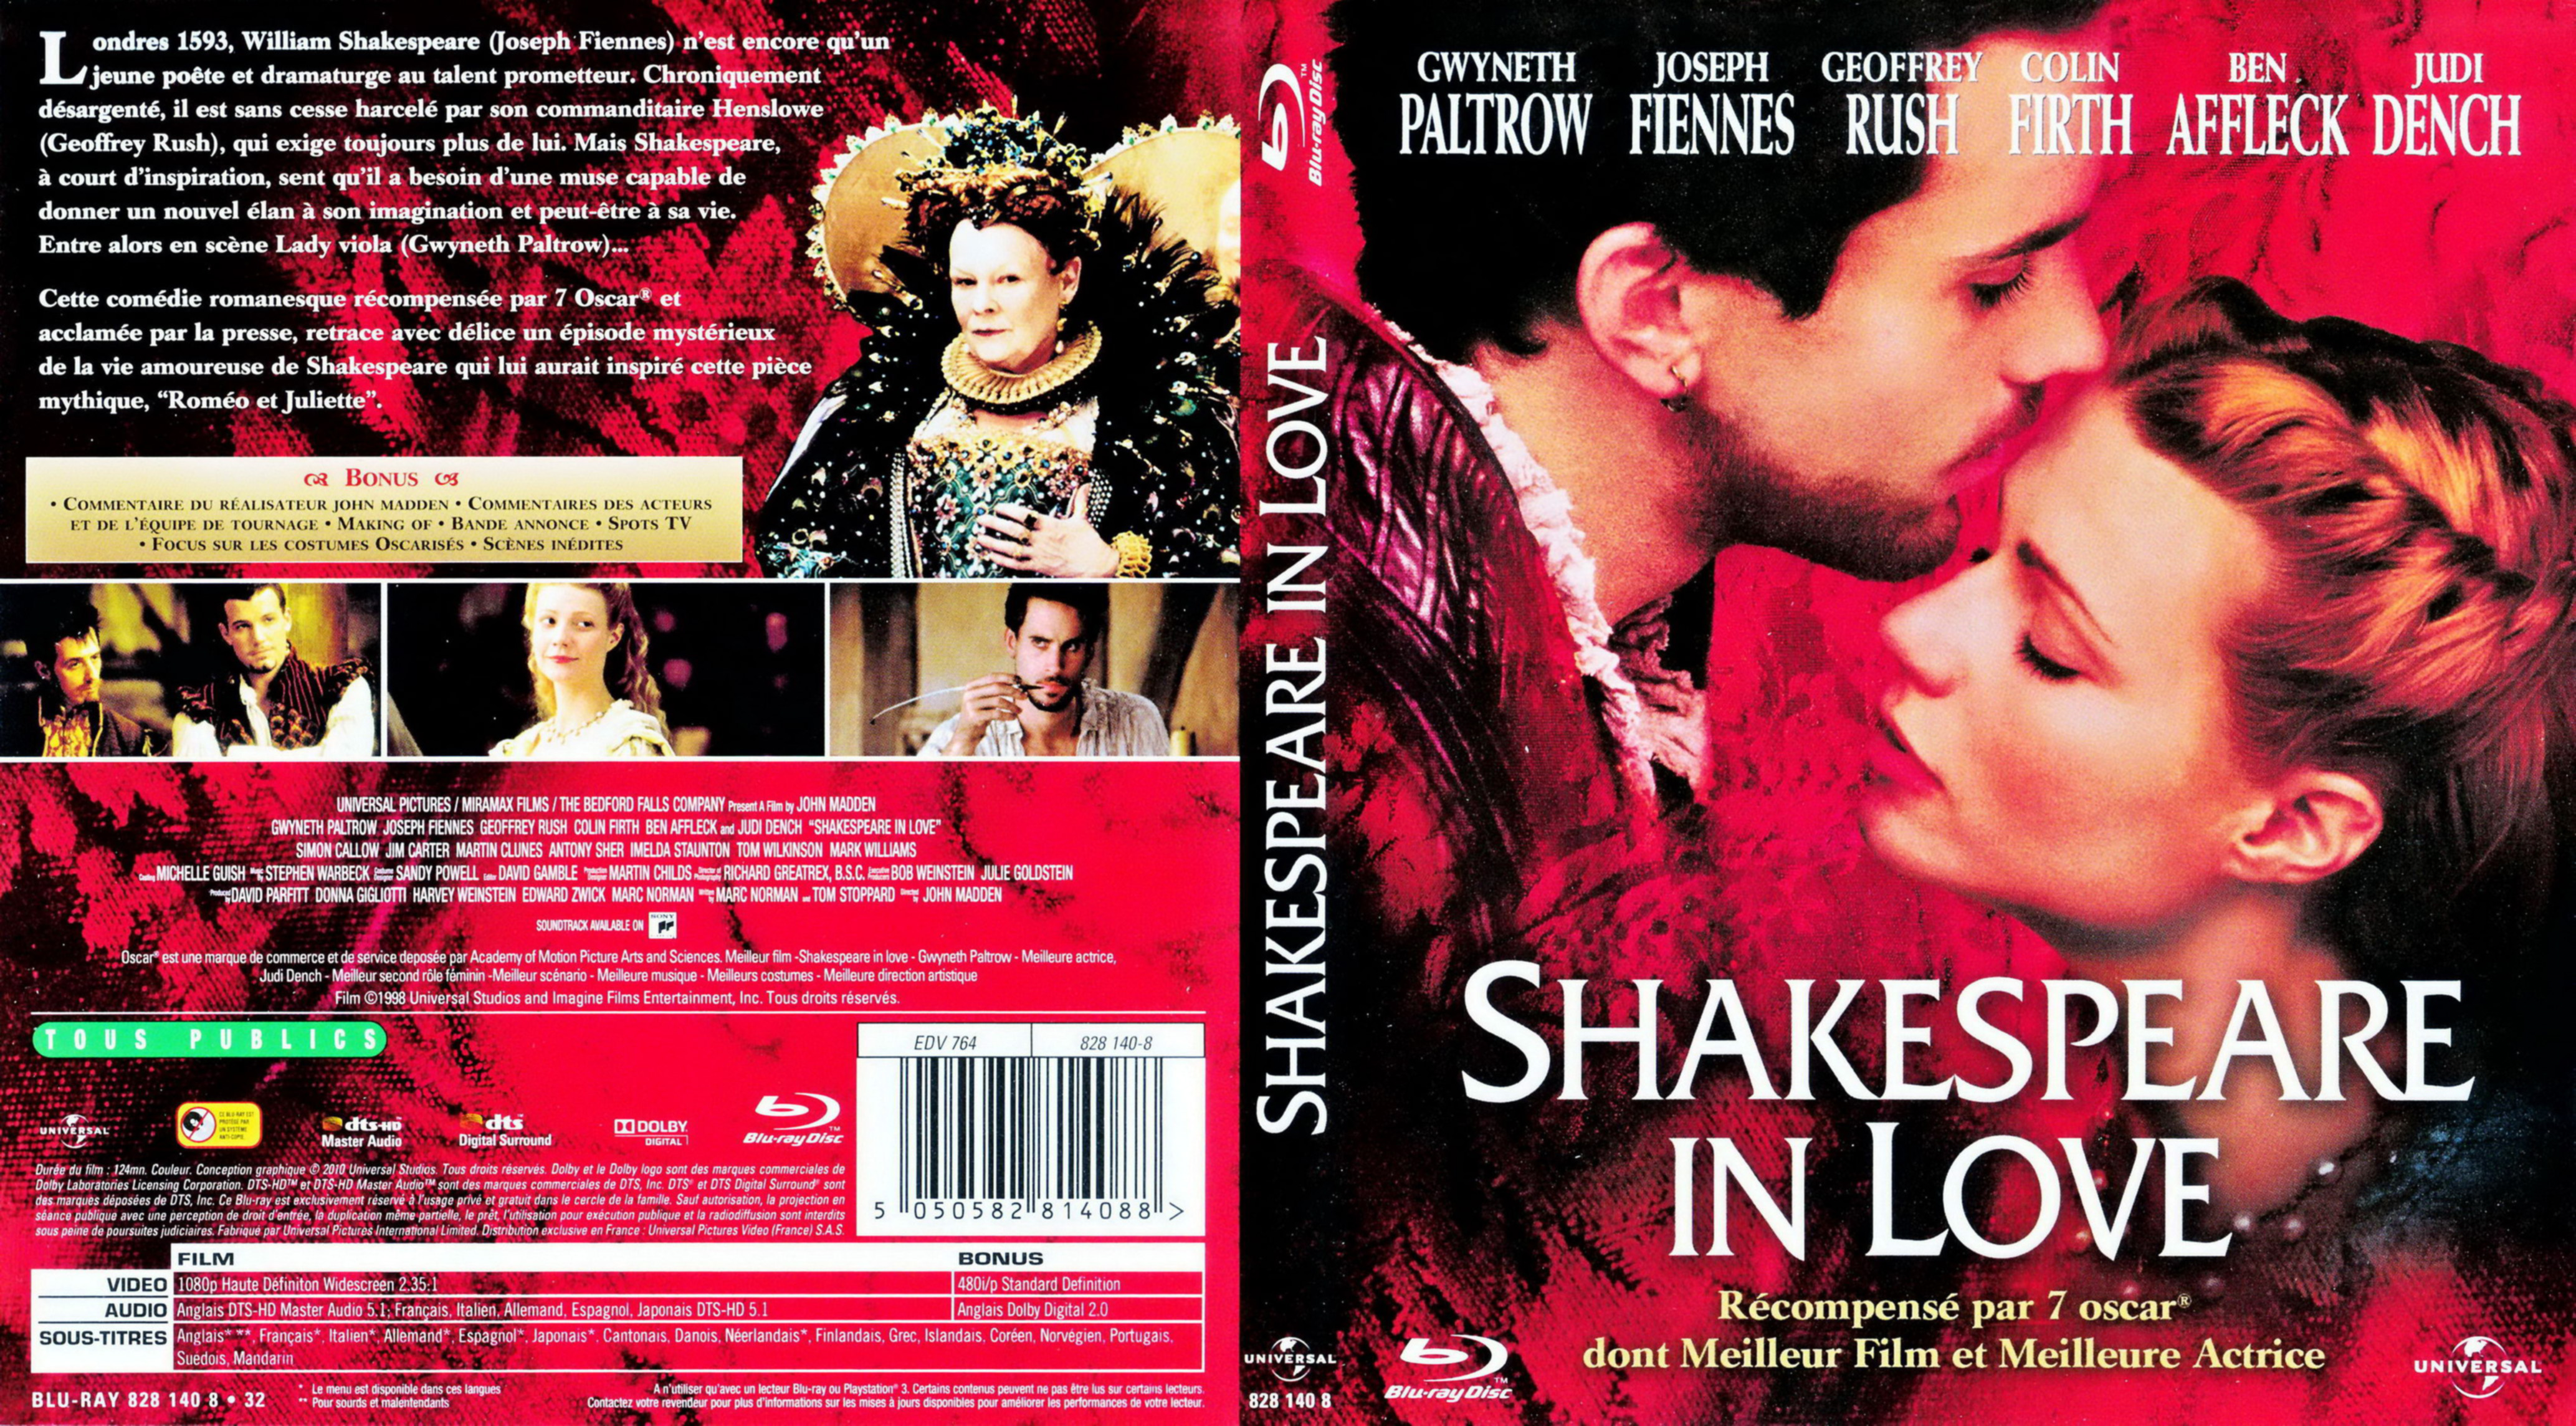 Jaquette DVD Shakespeare in love (BLU-RAY)